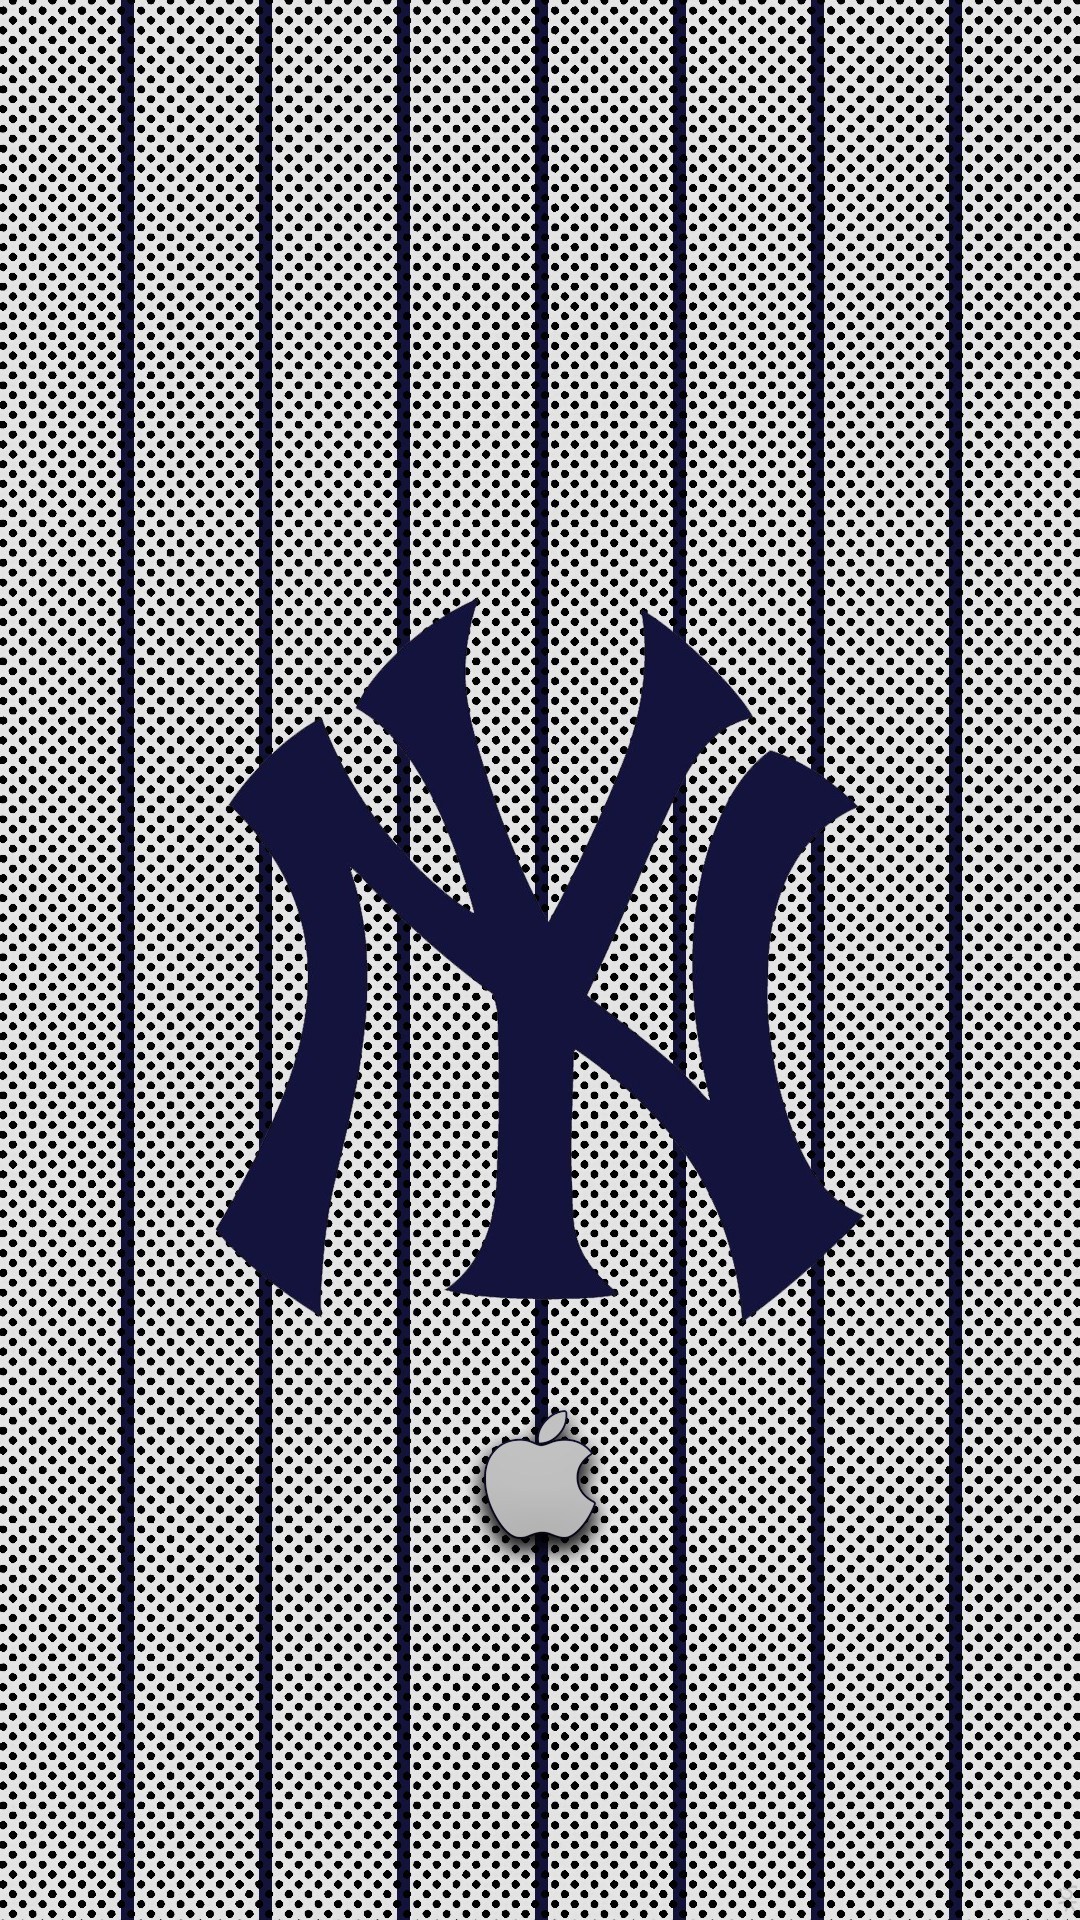 1080x1920 New York Yankees Wallpaper Iphone Unique Iphone 6 7 Plus Wallpaper Request  Thread Page 212